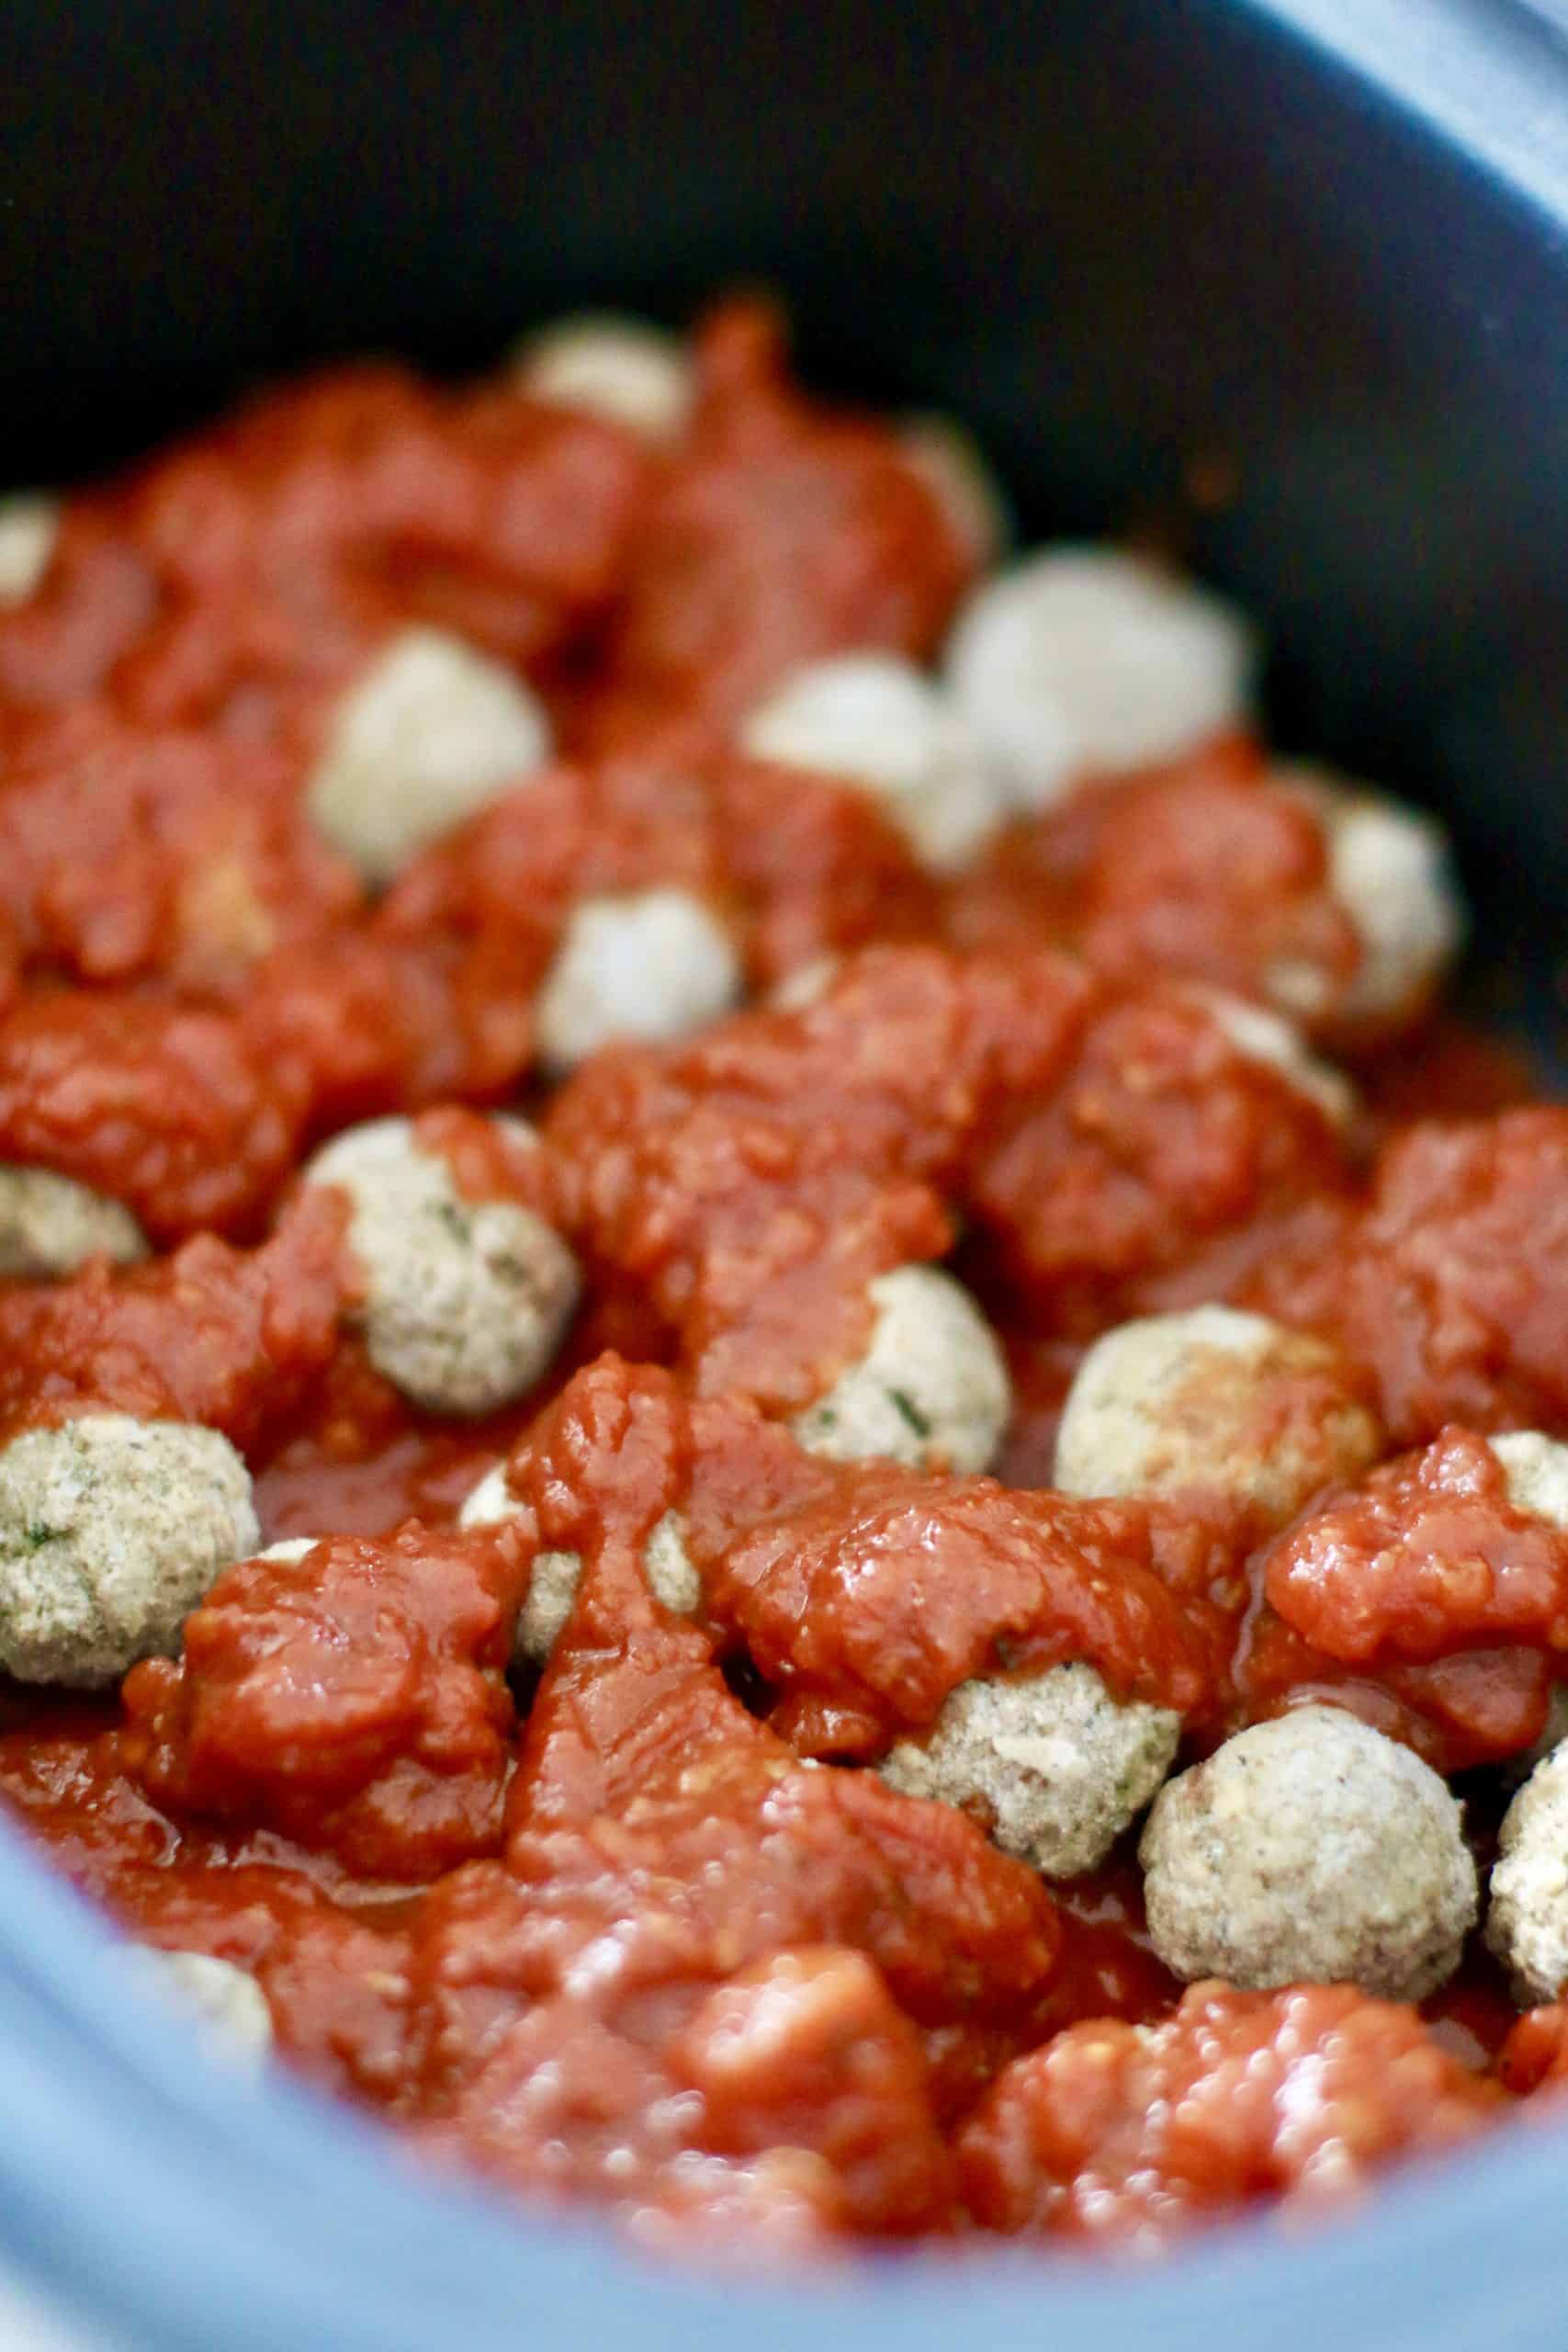 spaghetti sauce poured over frozen meatballs in an oval slow cooker.